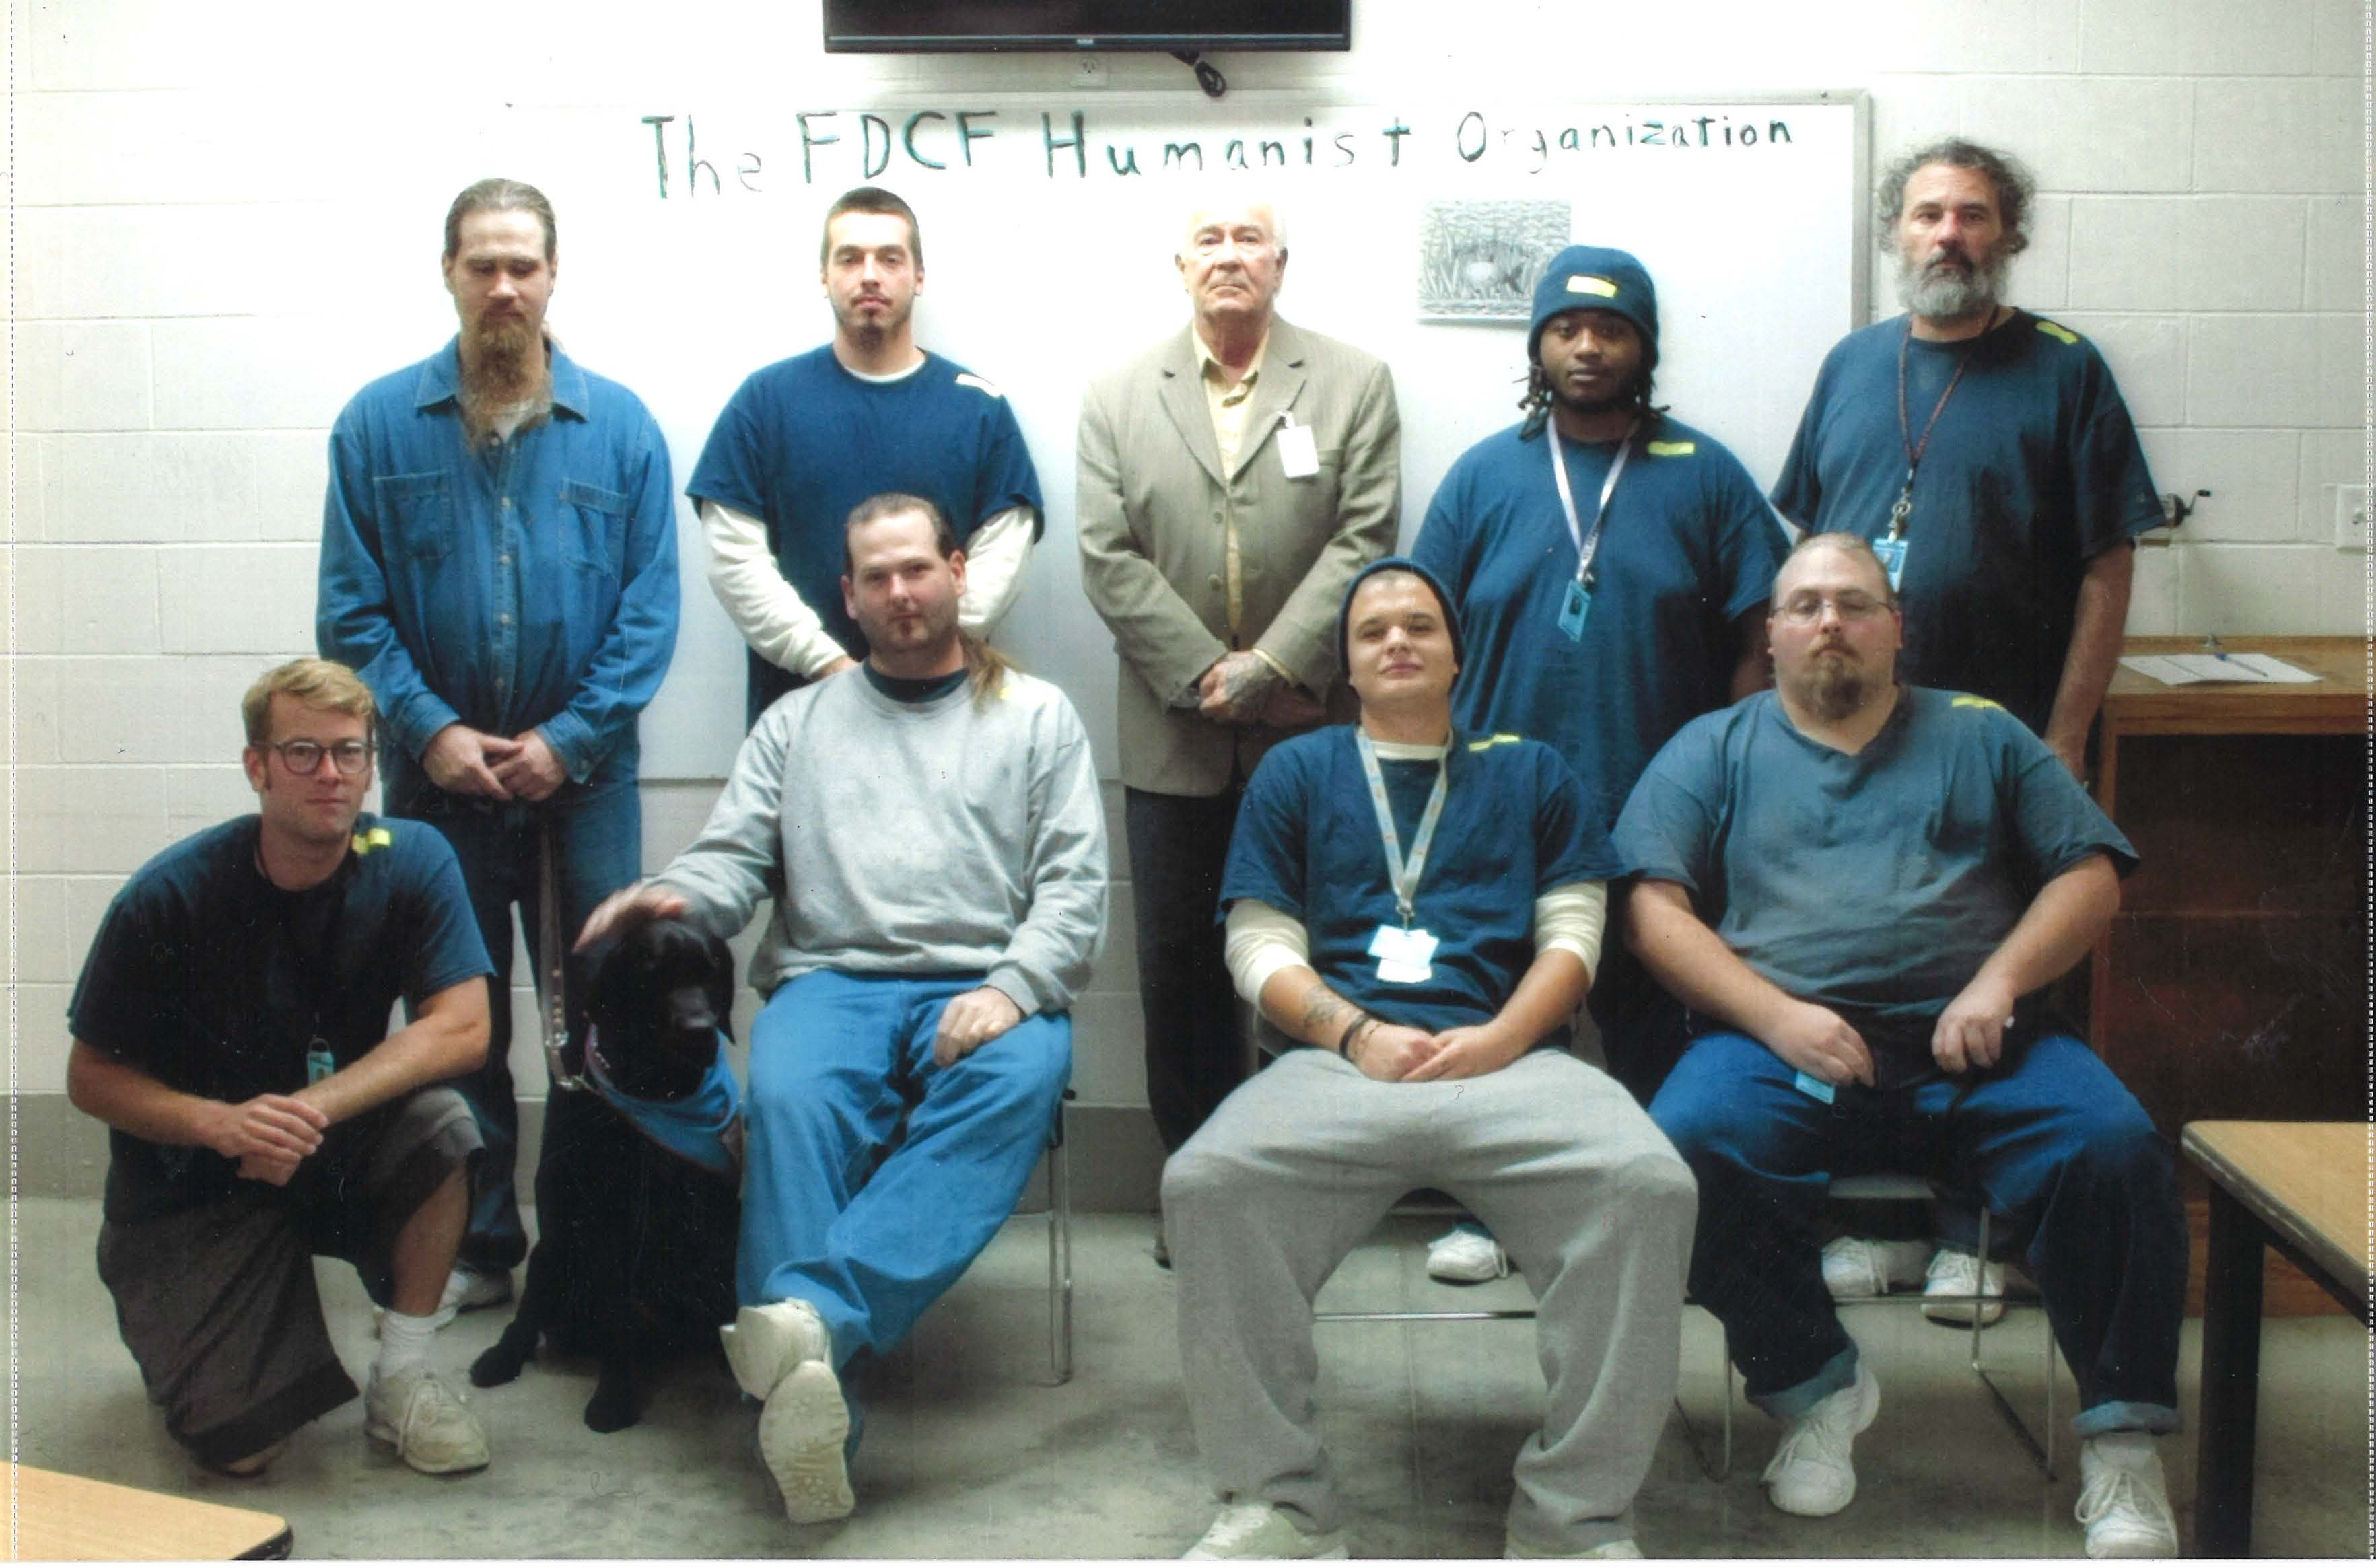 A humanist group in prison.